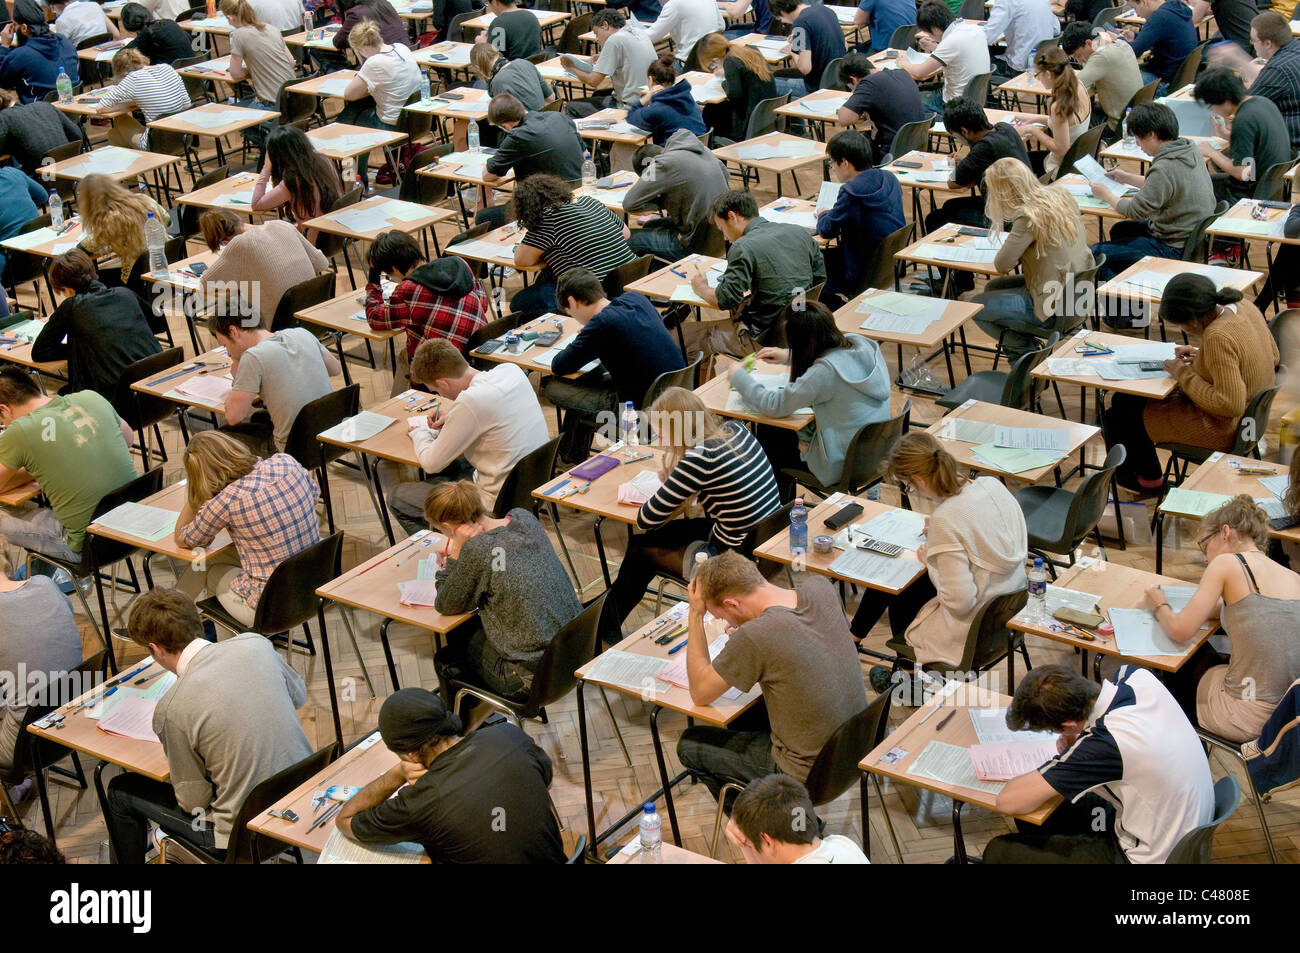 University students from King's College London, sitting exams Stock Photo